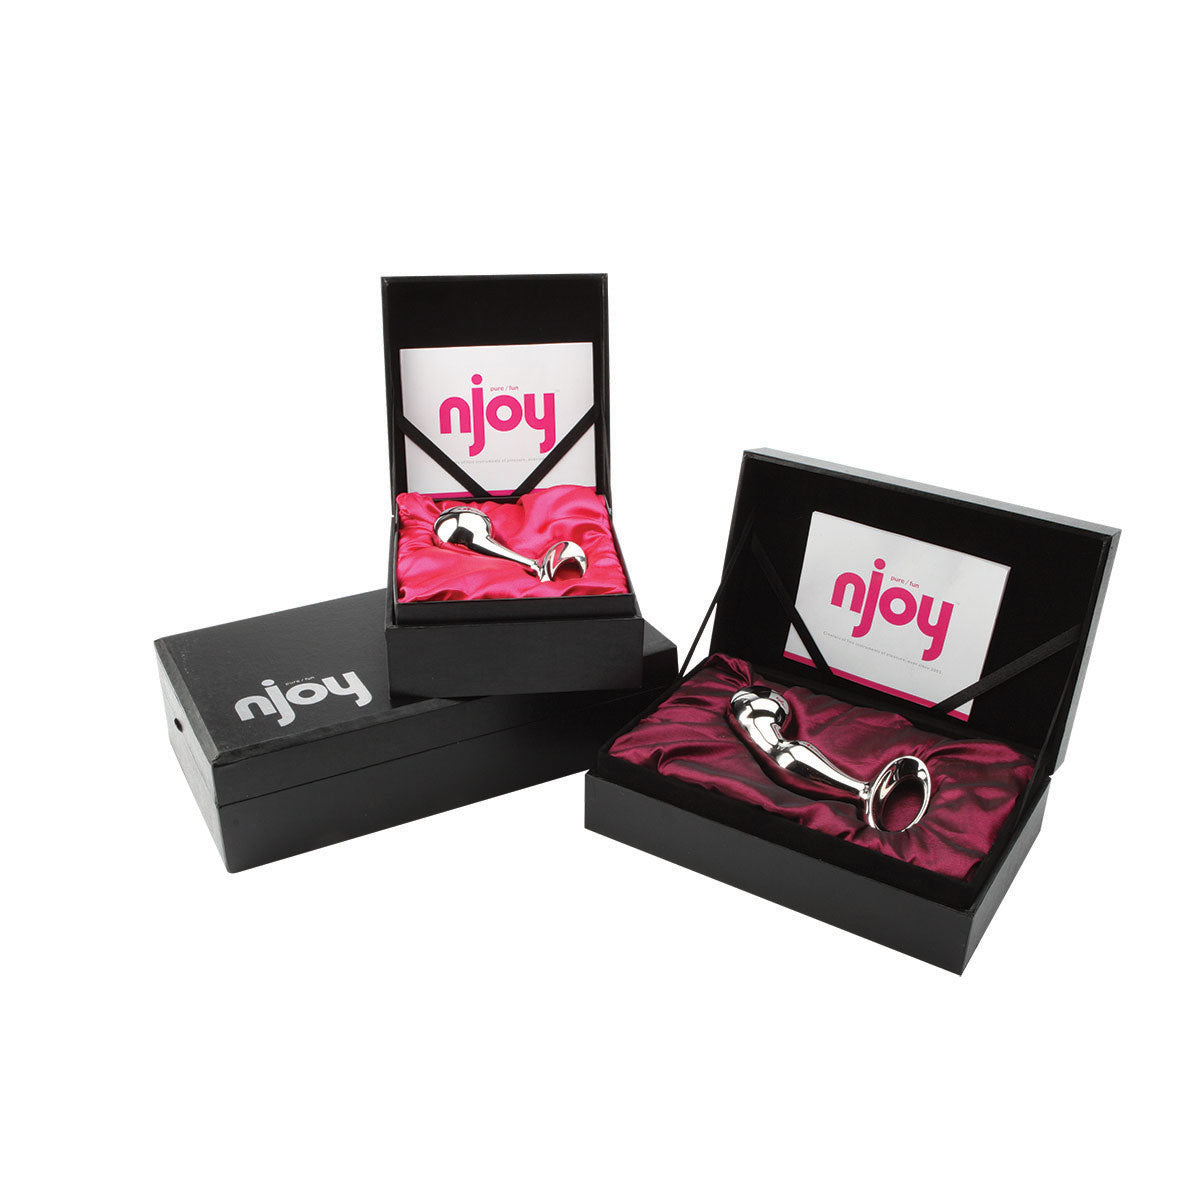 njoy Pure Plug Small Intimates Adult Boutique